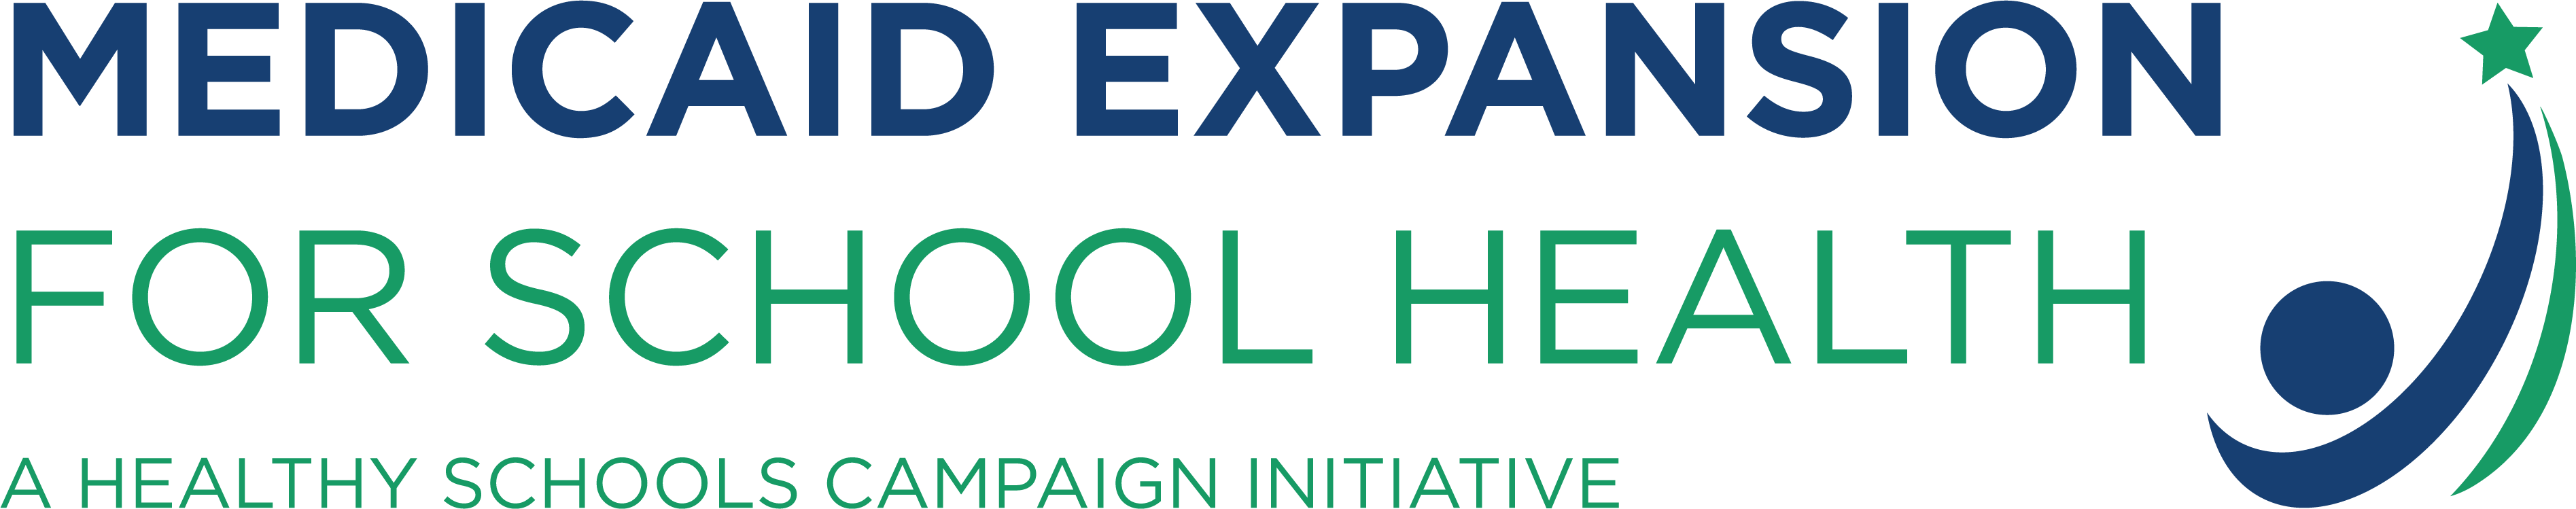 Medicaid Expansion for School Health